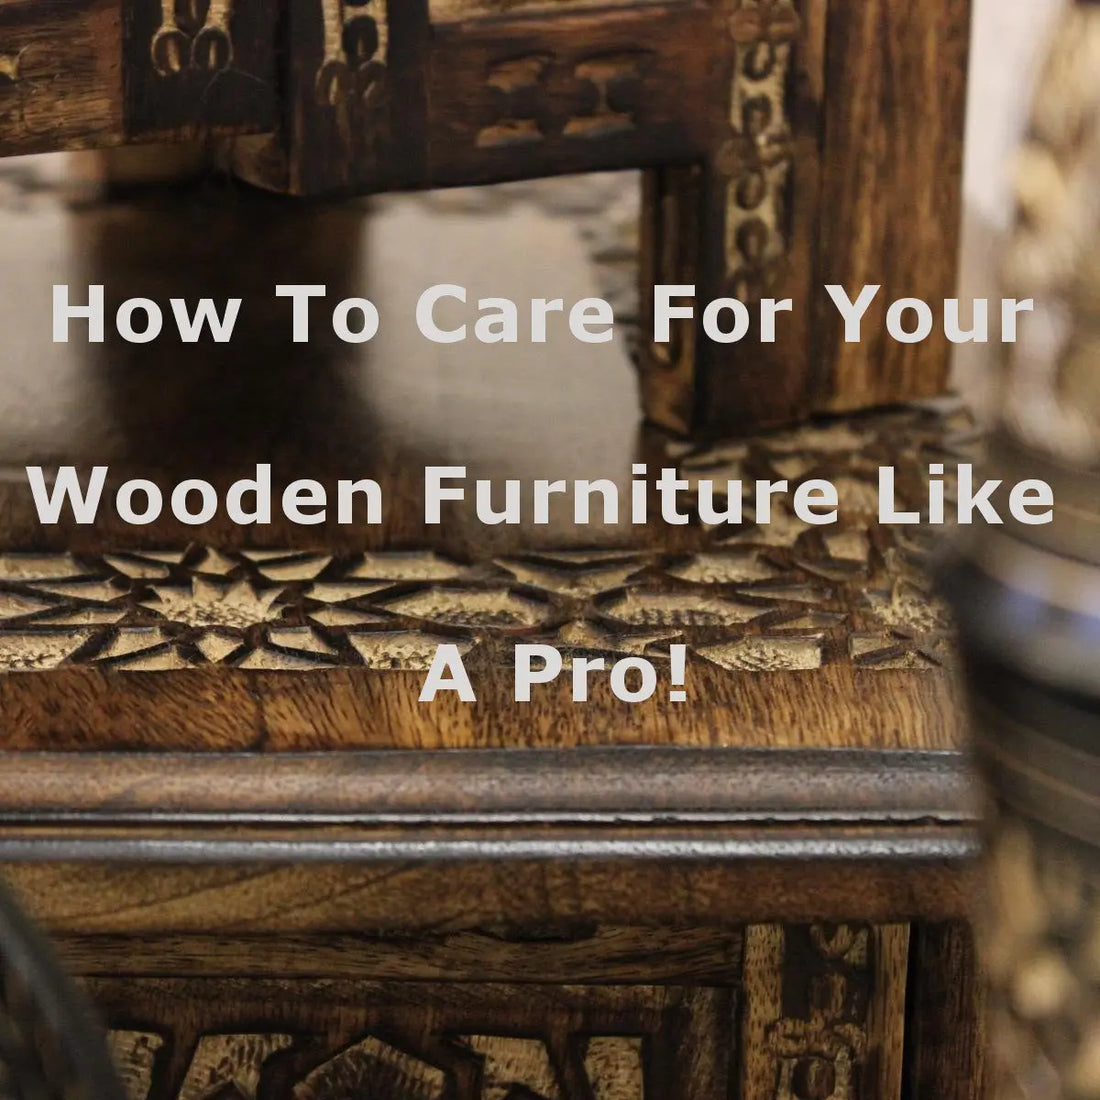 How to care for your wooden furniture like a pro!